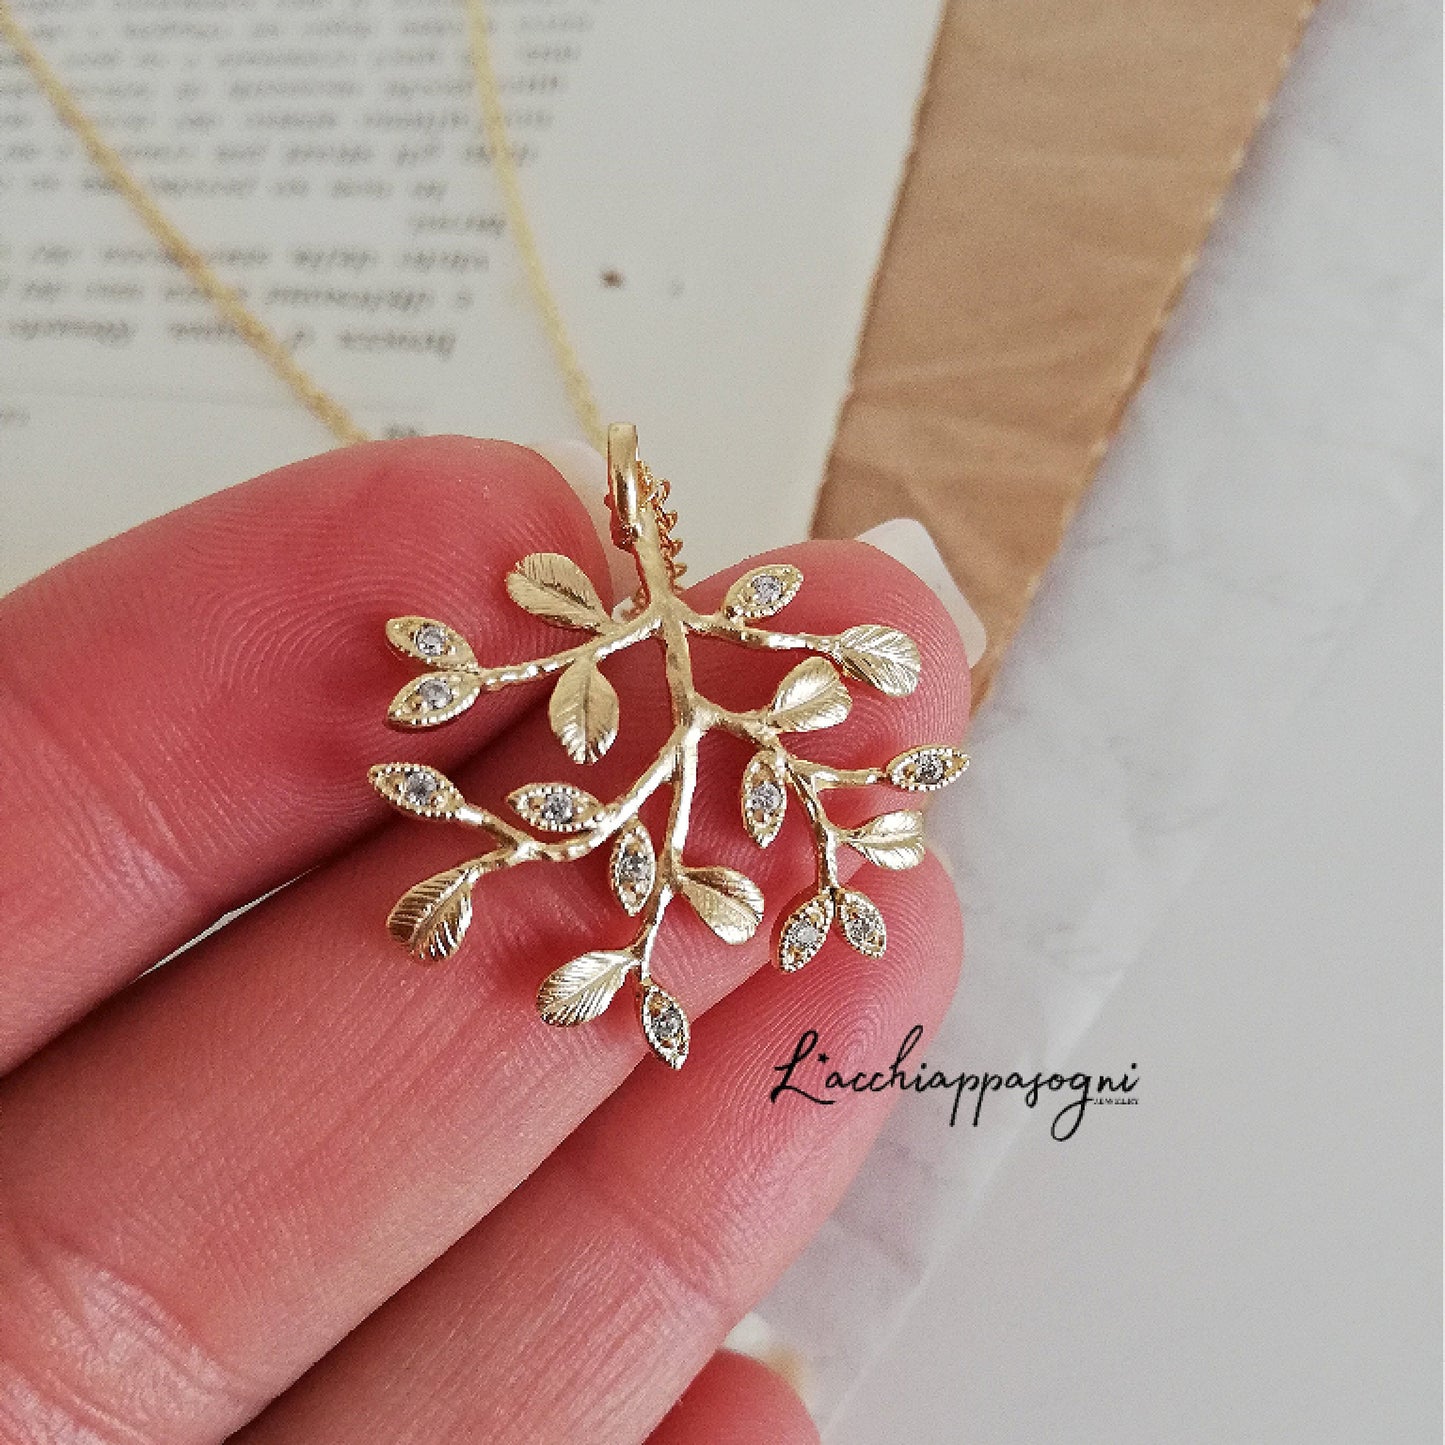 Branch Tree Necklace, Tree of Life Necklace with crystals